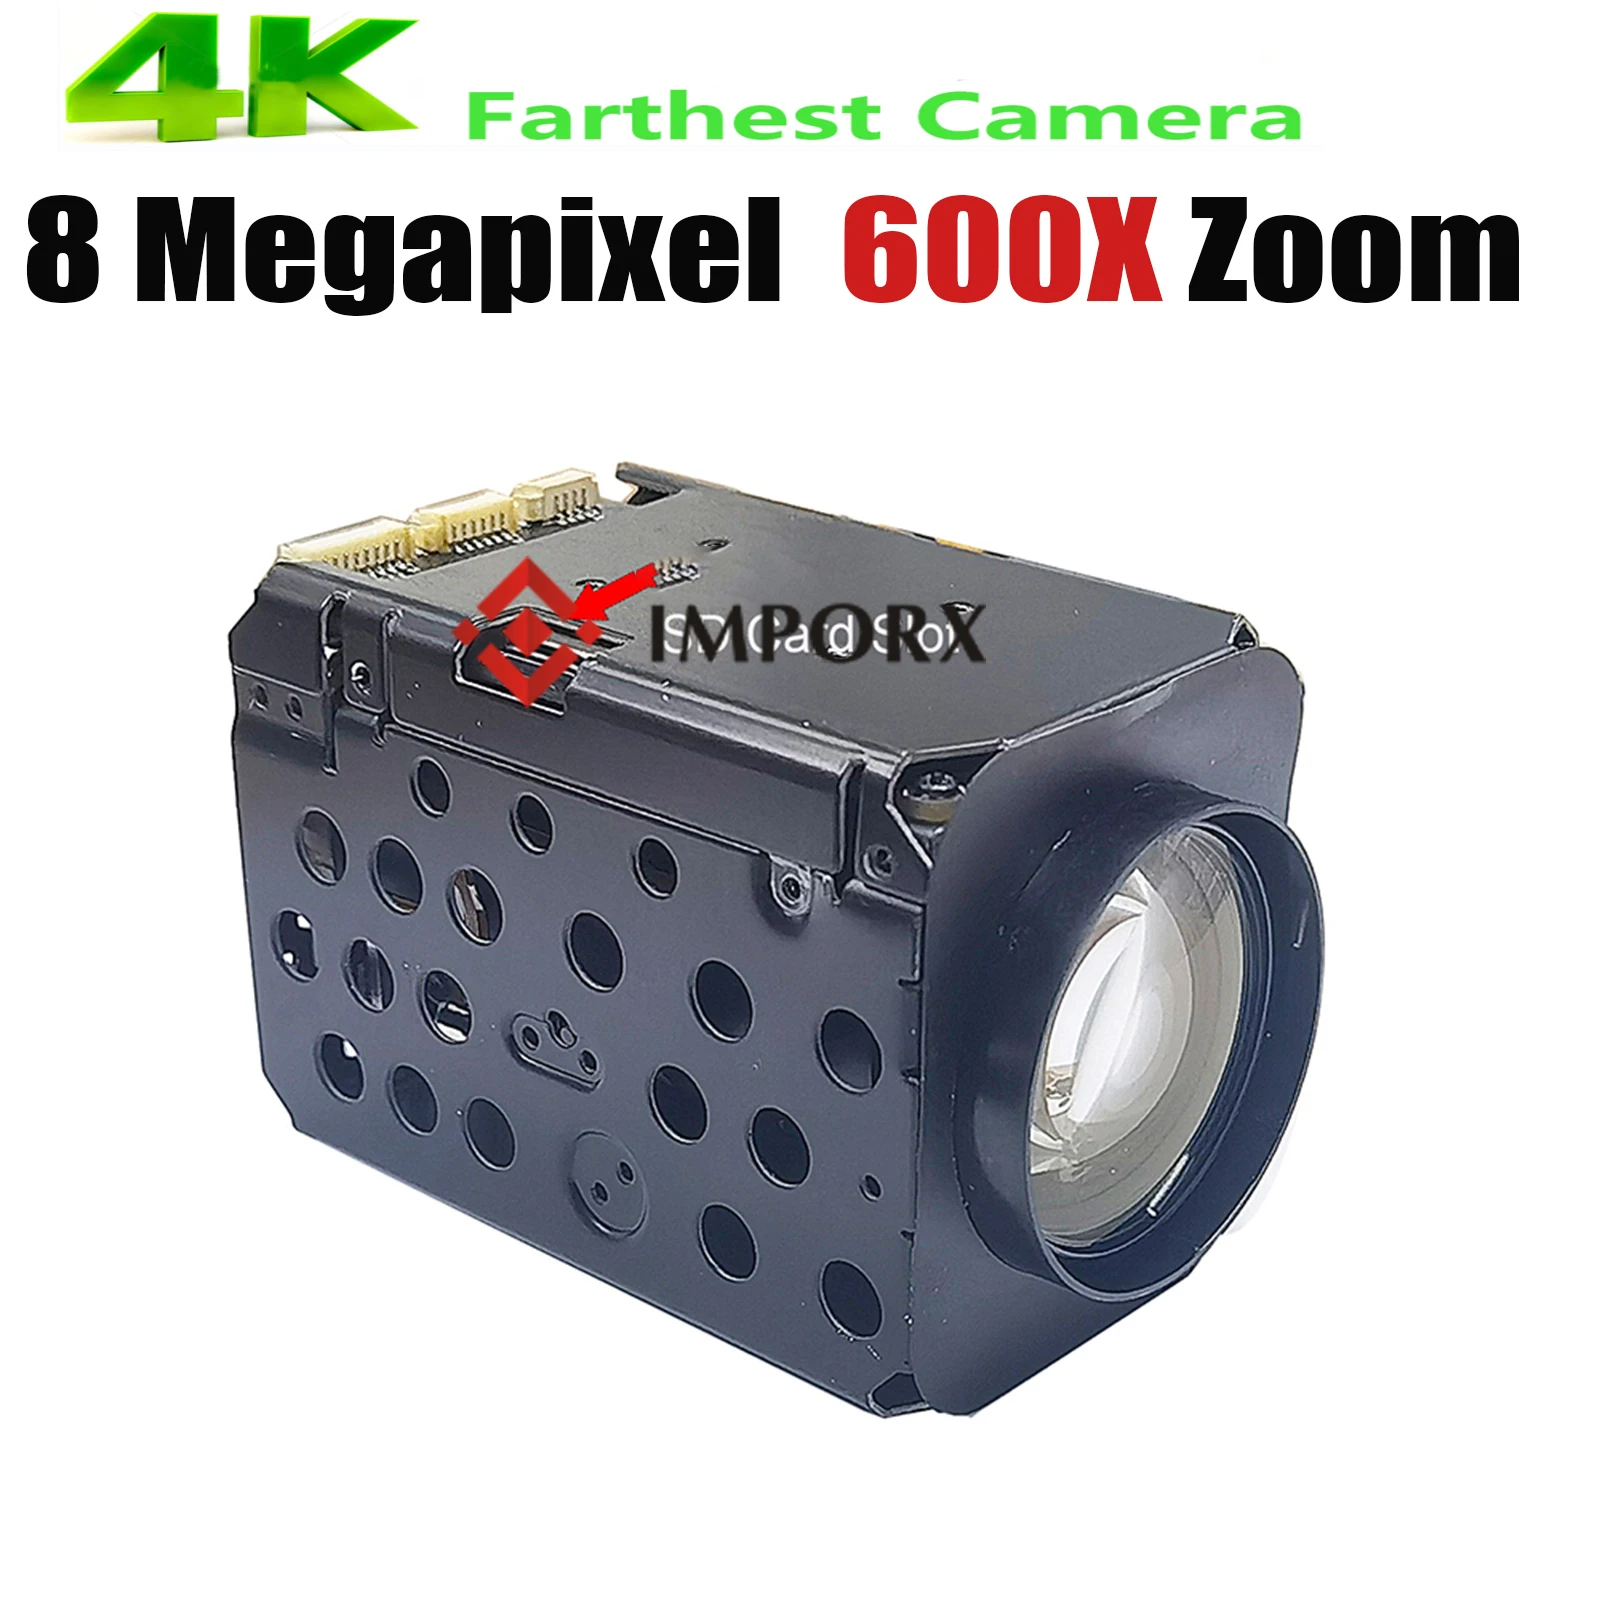 8mp-4k-600x-zoom-rtmp-ivm4200-p2p-onvif-imx415-sd-256gb-ip-camera-two-way-audio